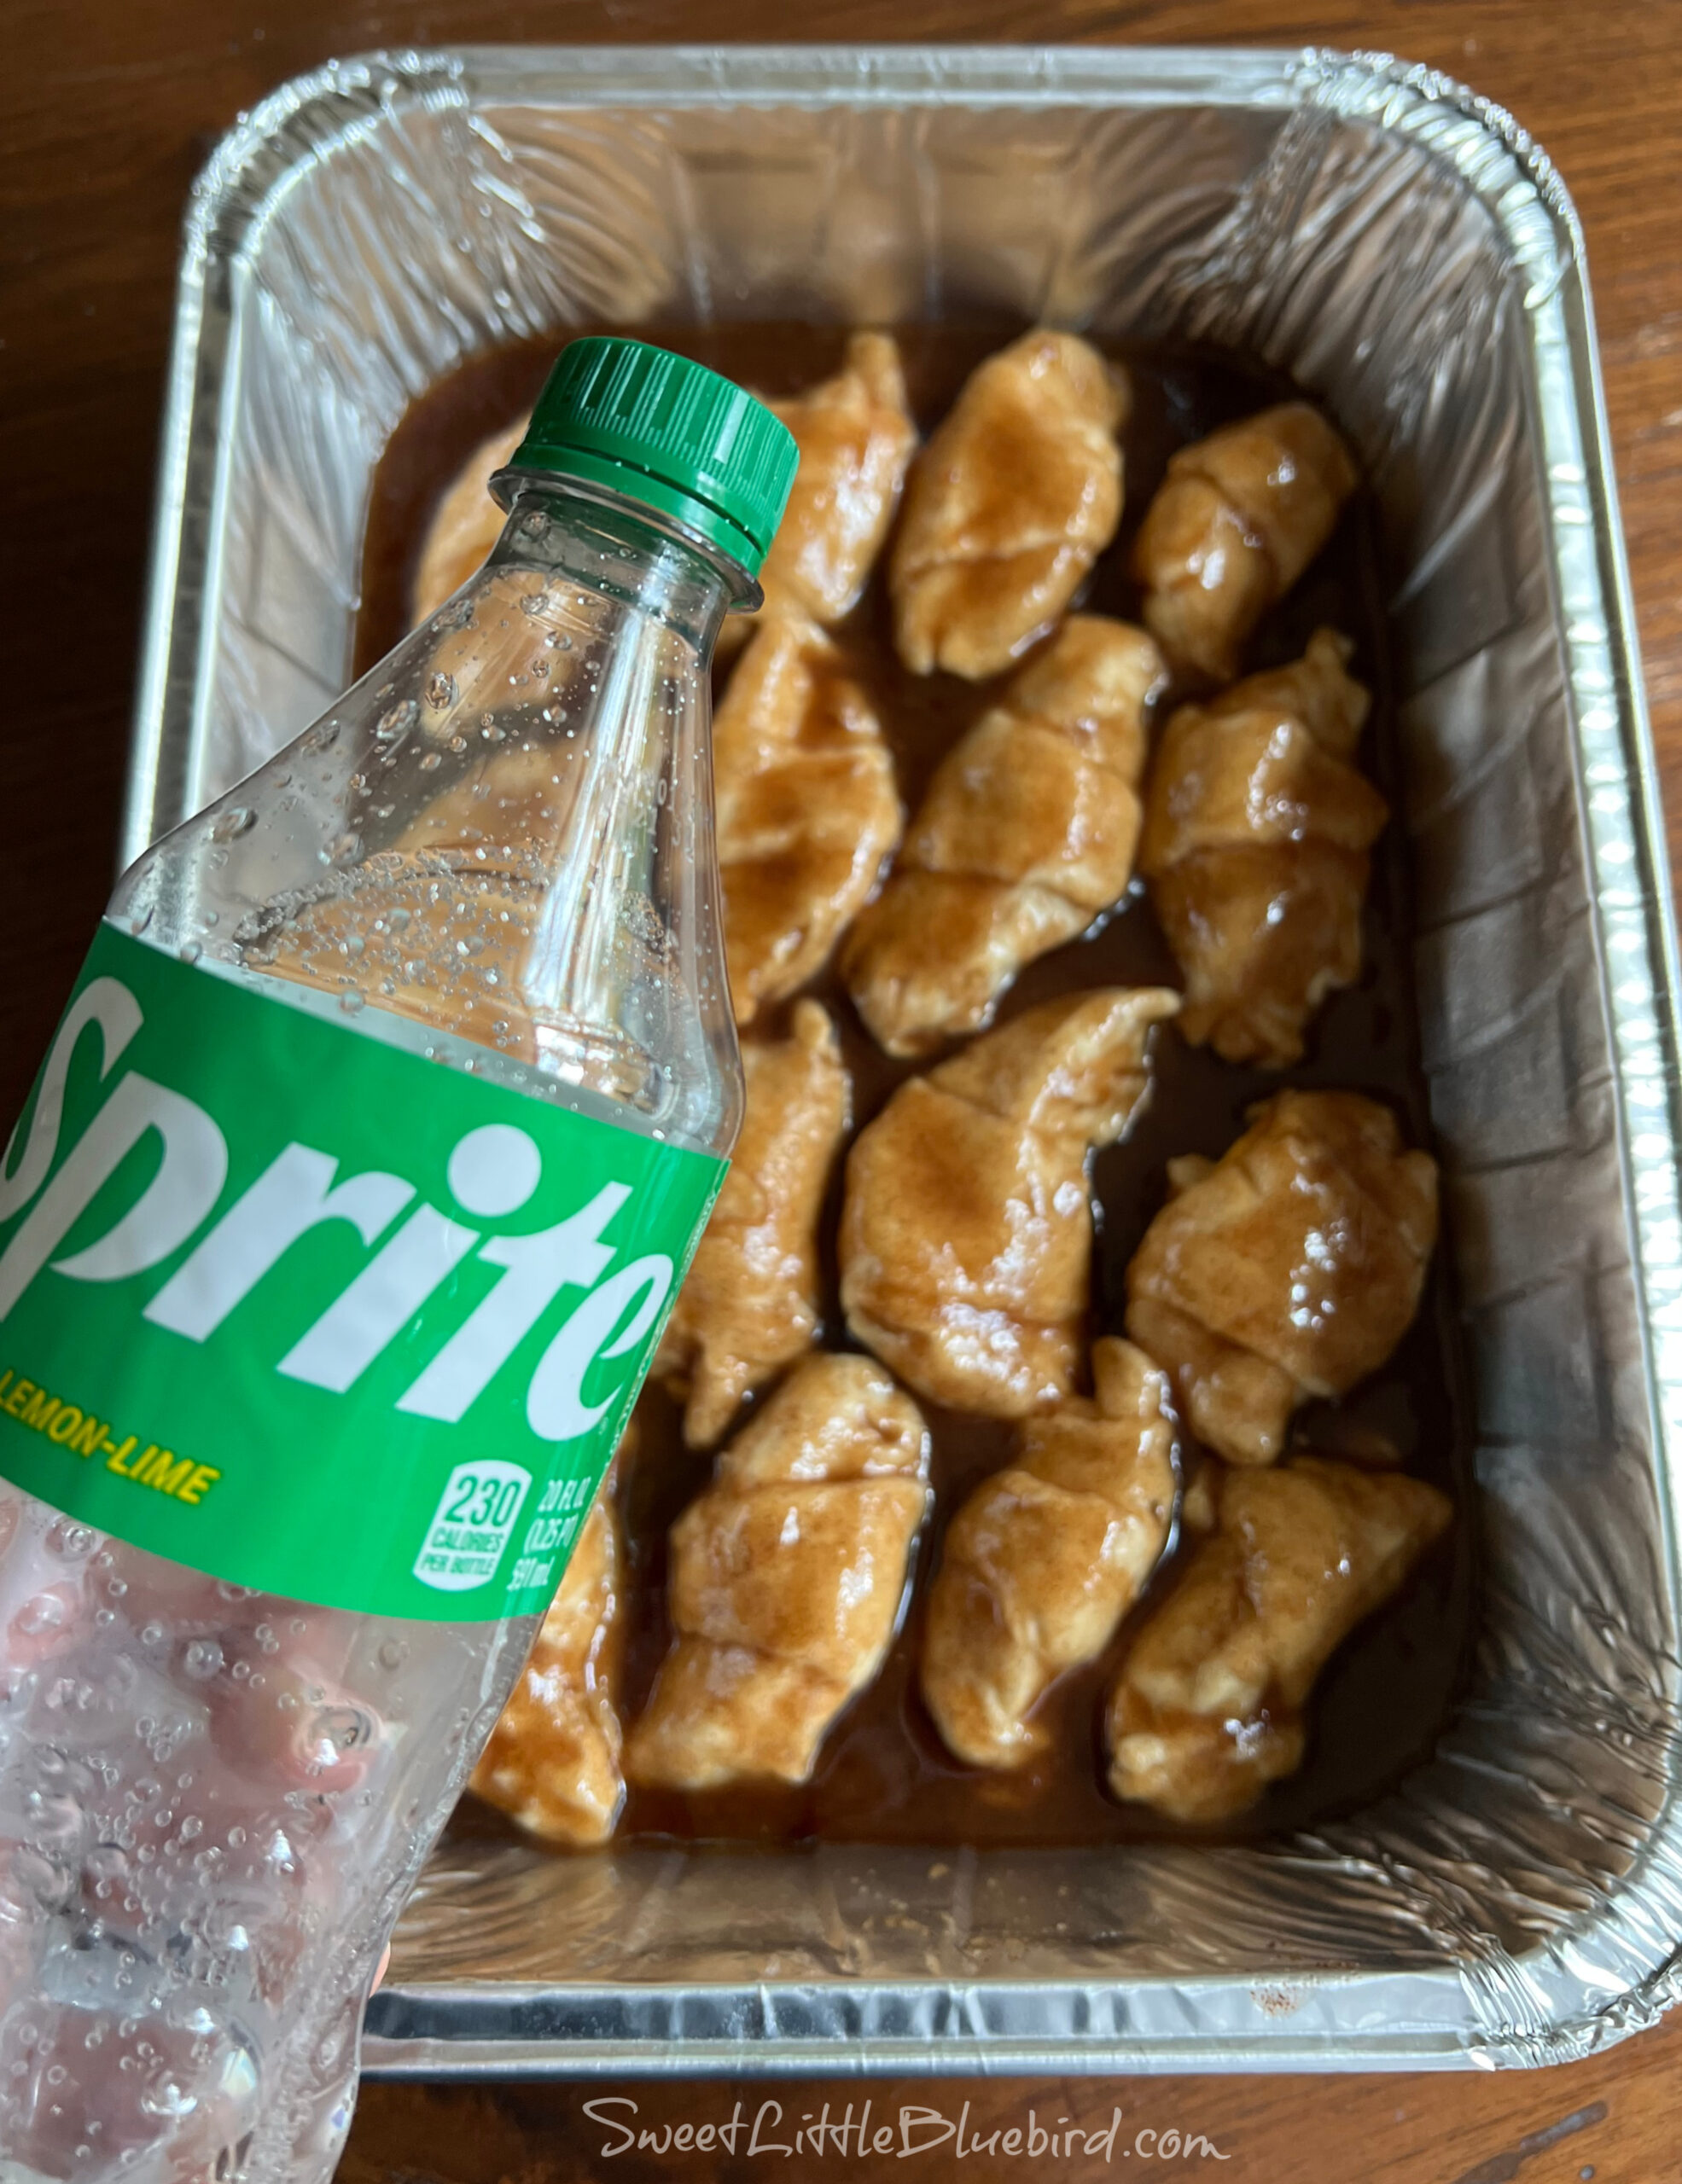 This photo shows the dumplings in the pan after adding the sugar-butter mixture, with a hand holding a bottle of sprite, ready to pour around the dumplings. 